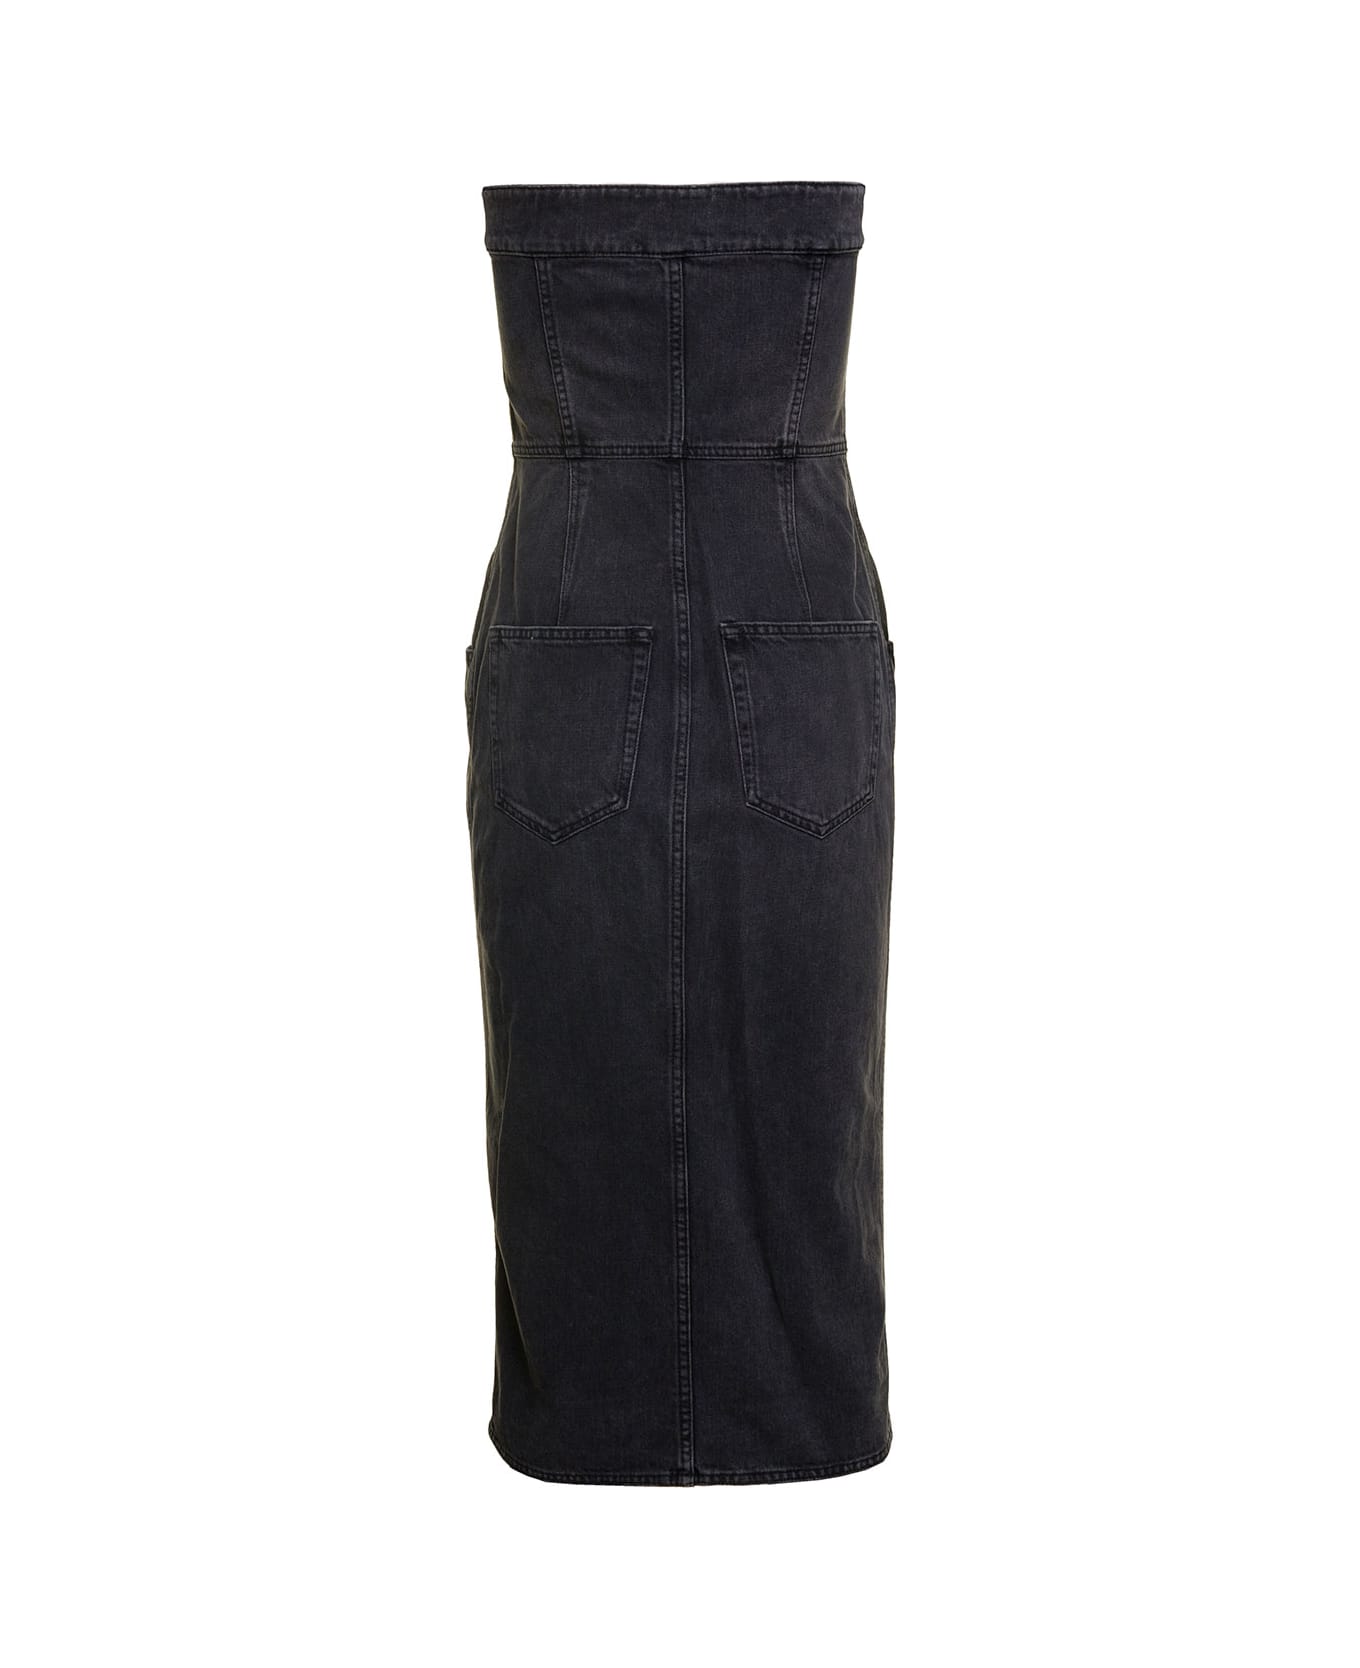 Isabel Marant Dark Grey Strapless Midi Dress With Branded Buttons In Cotton Denim Woman - Grey